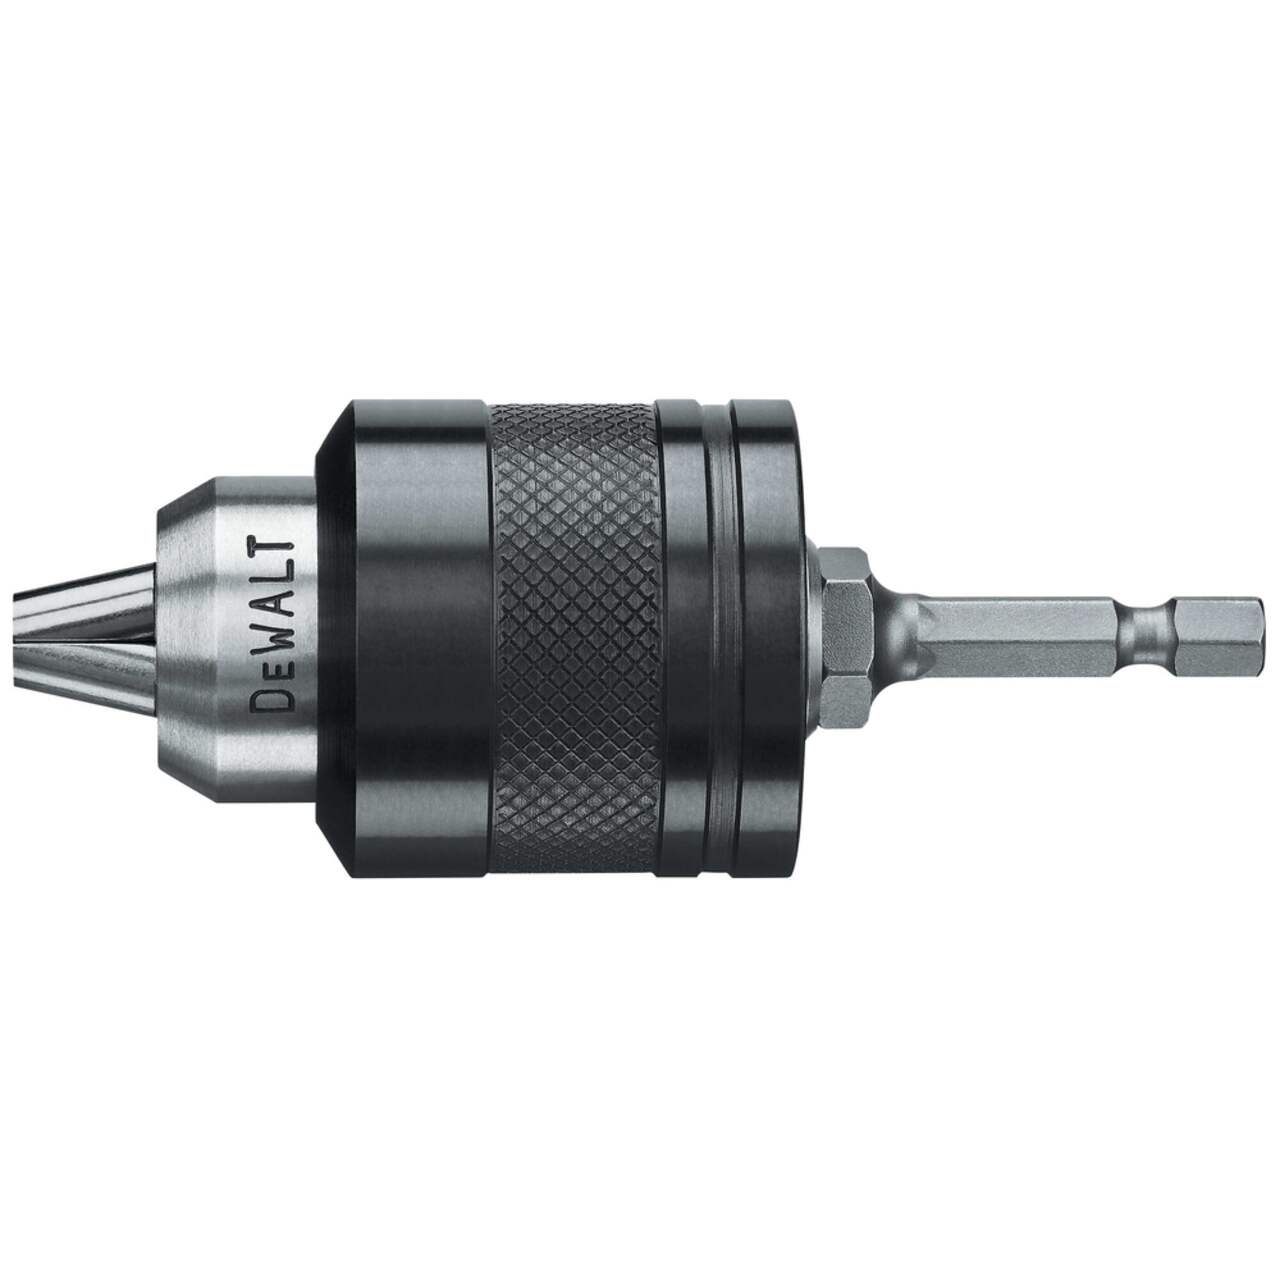 https://media-www.canadiantire.ca/product/fixing/tools/portable-power-tools/7747133/dw3-8-keyless-impact-accessory-chuck-d64d8292-f5bd-45ca-b698-585a447a6dbe.png?imdensity=1&imwidth=640&impolicy=mZoom